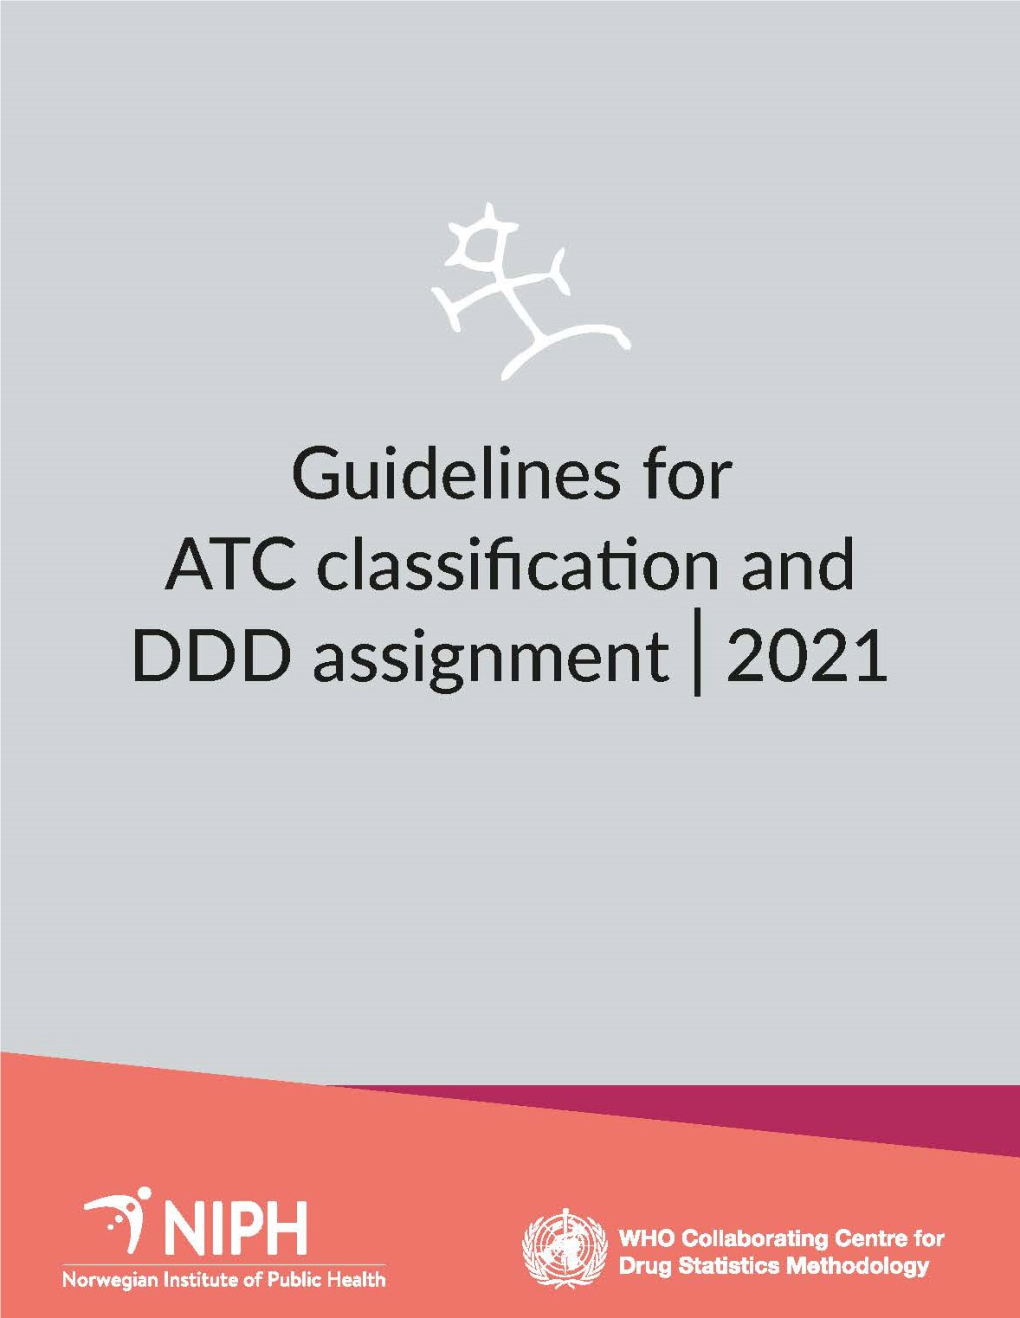 Guidelines for ATC Classification and DDD Assignment 2021